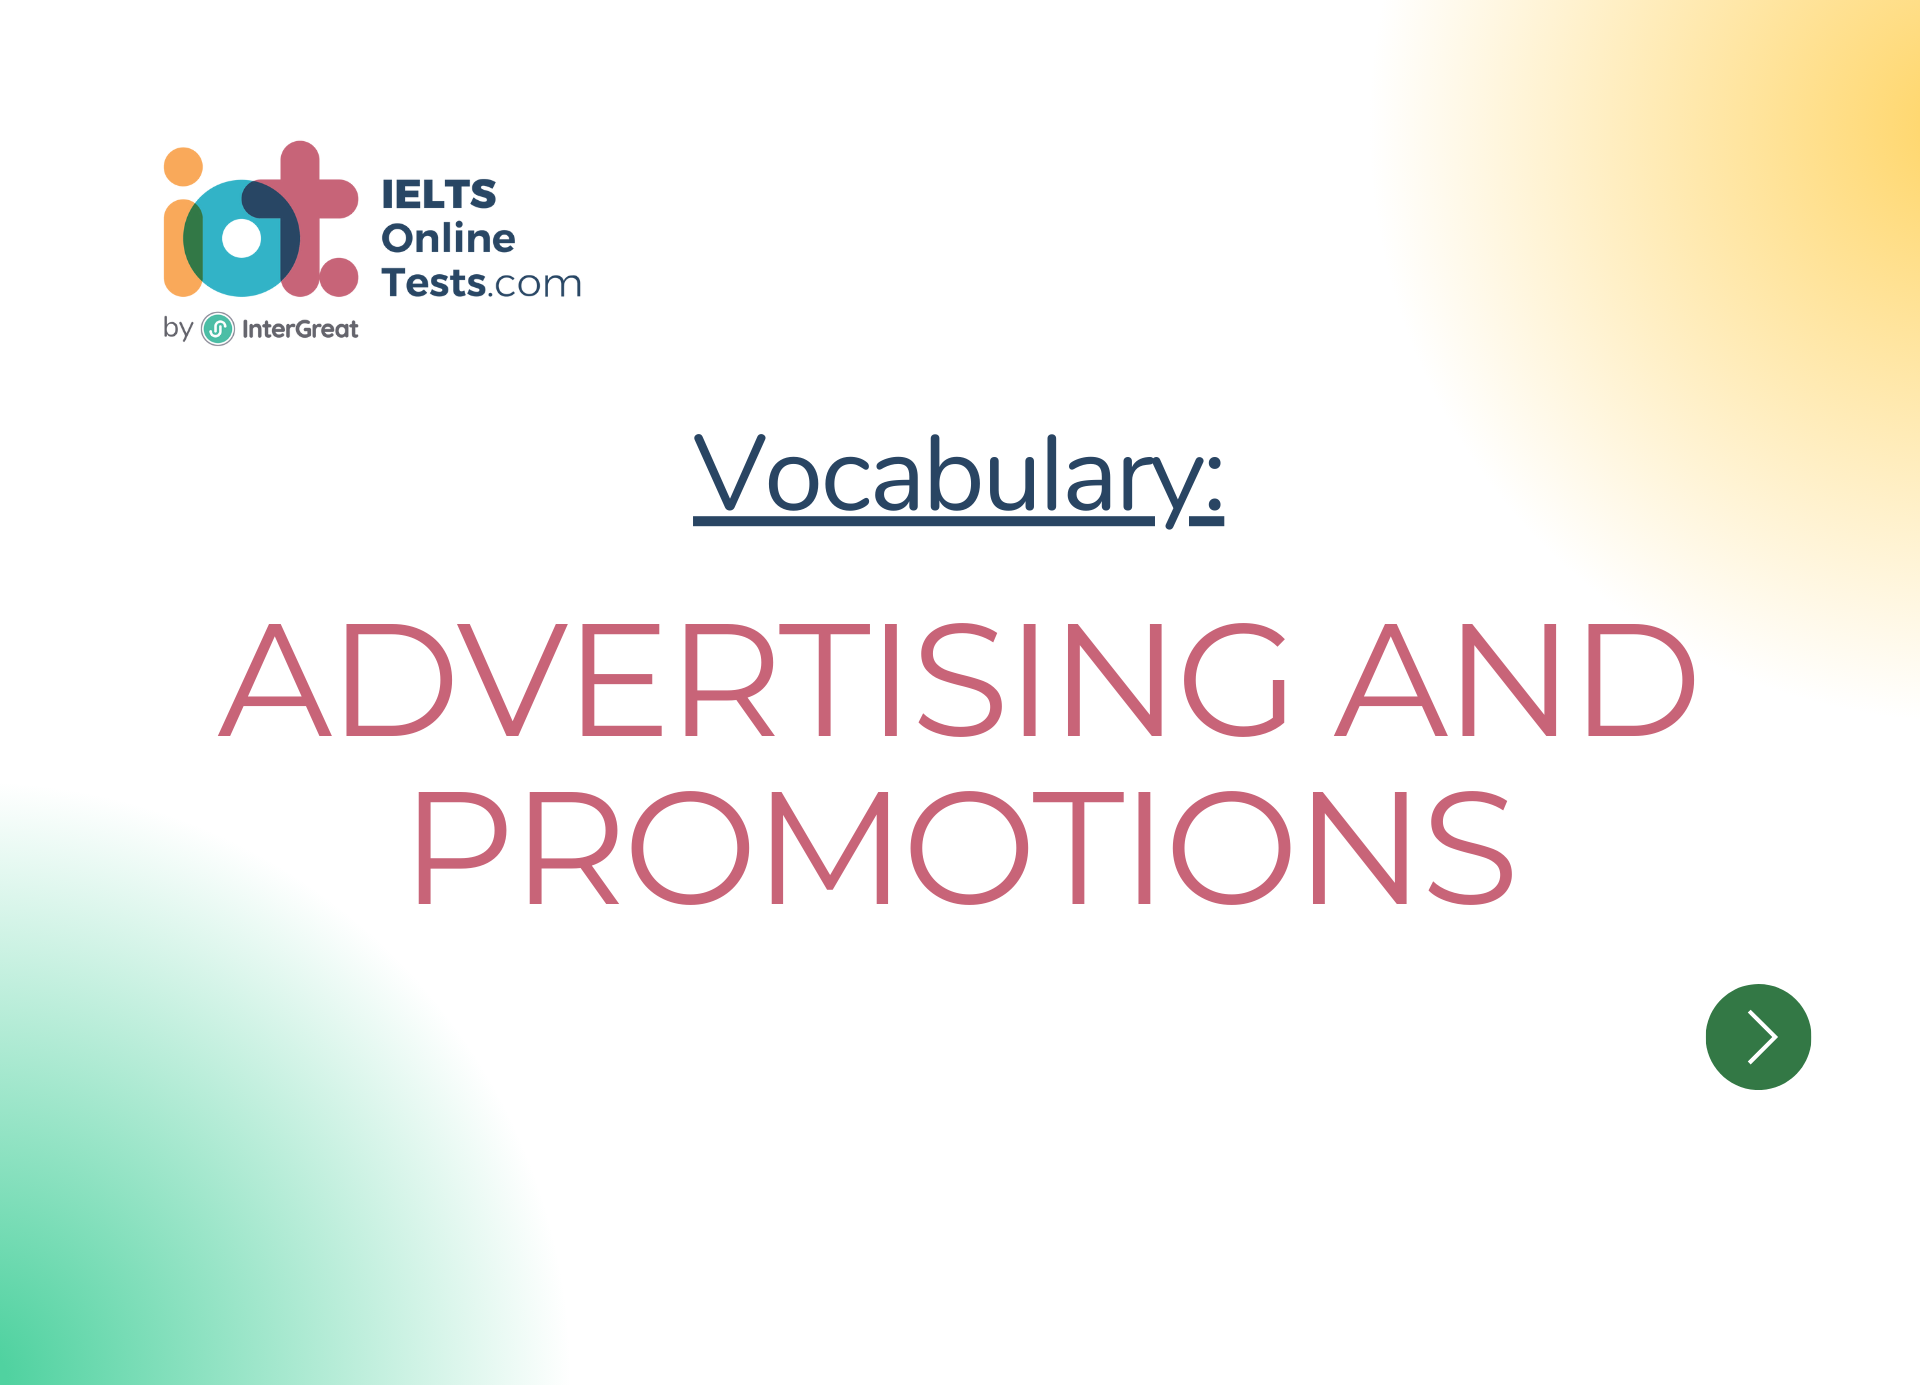 Advertising and promotions